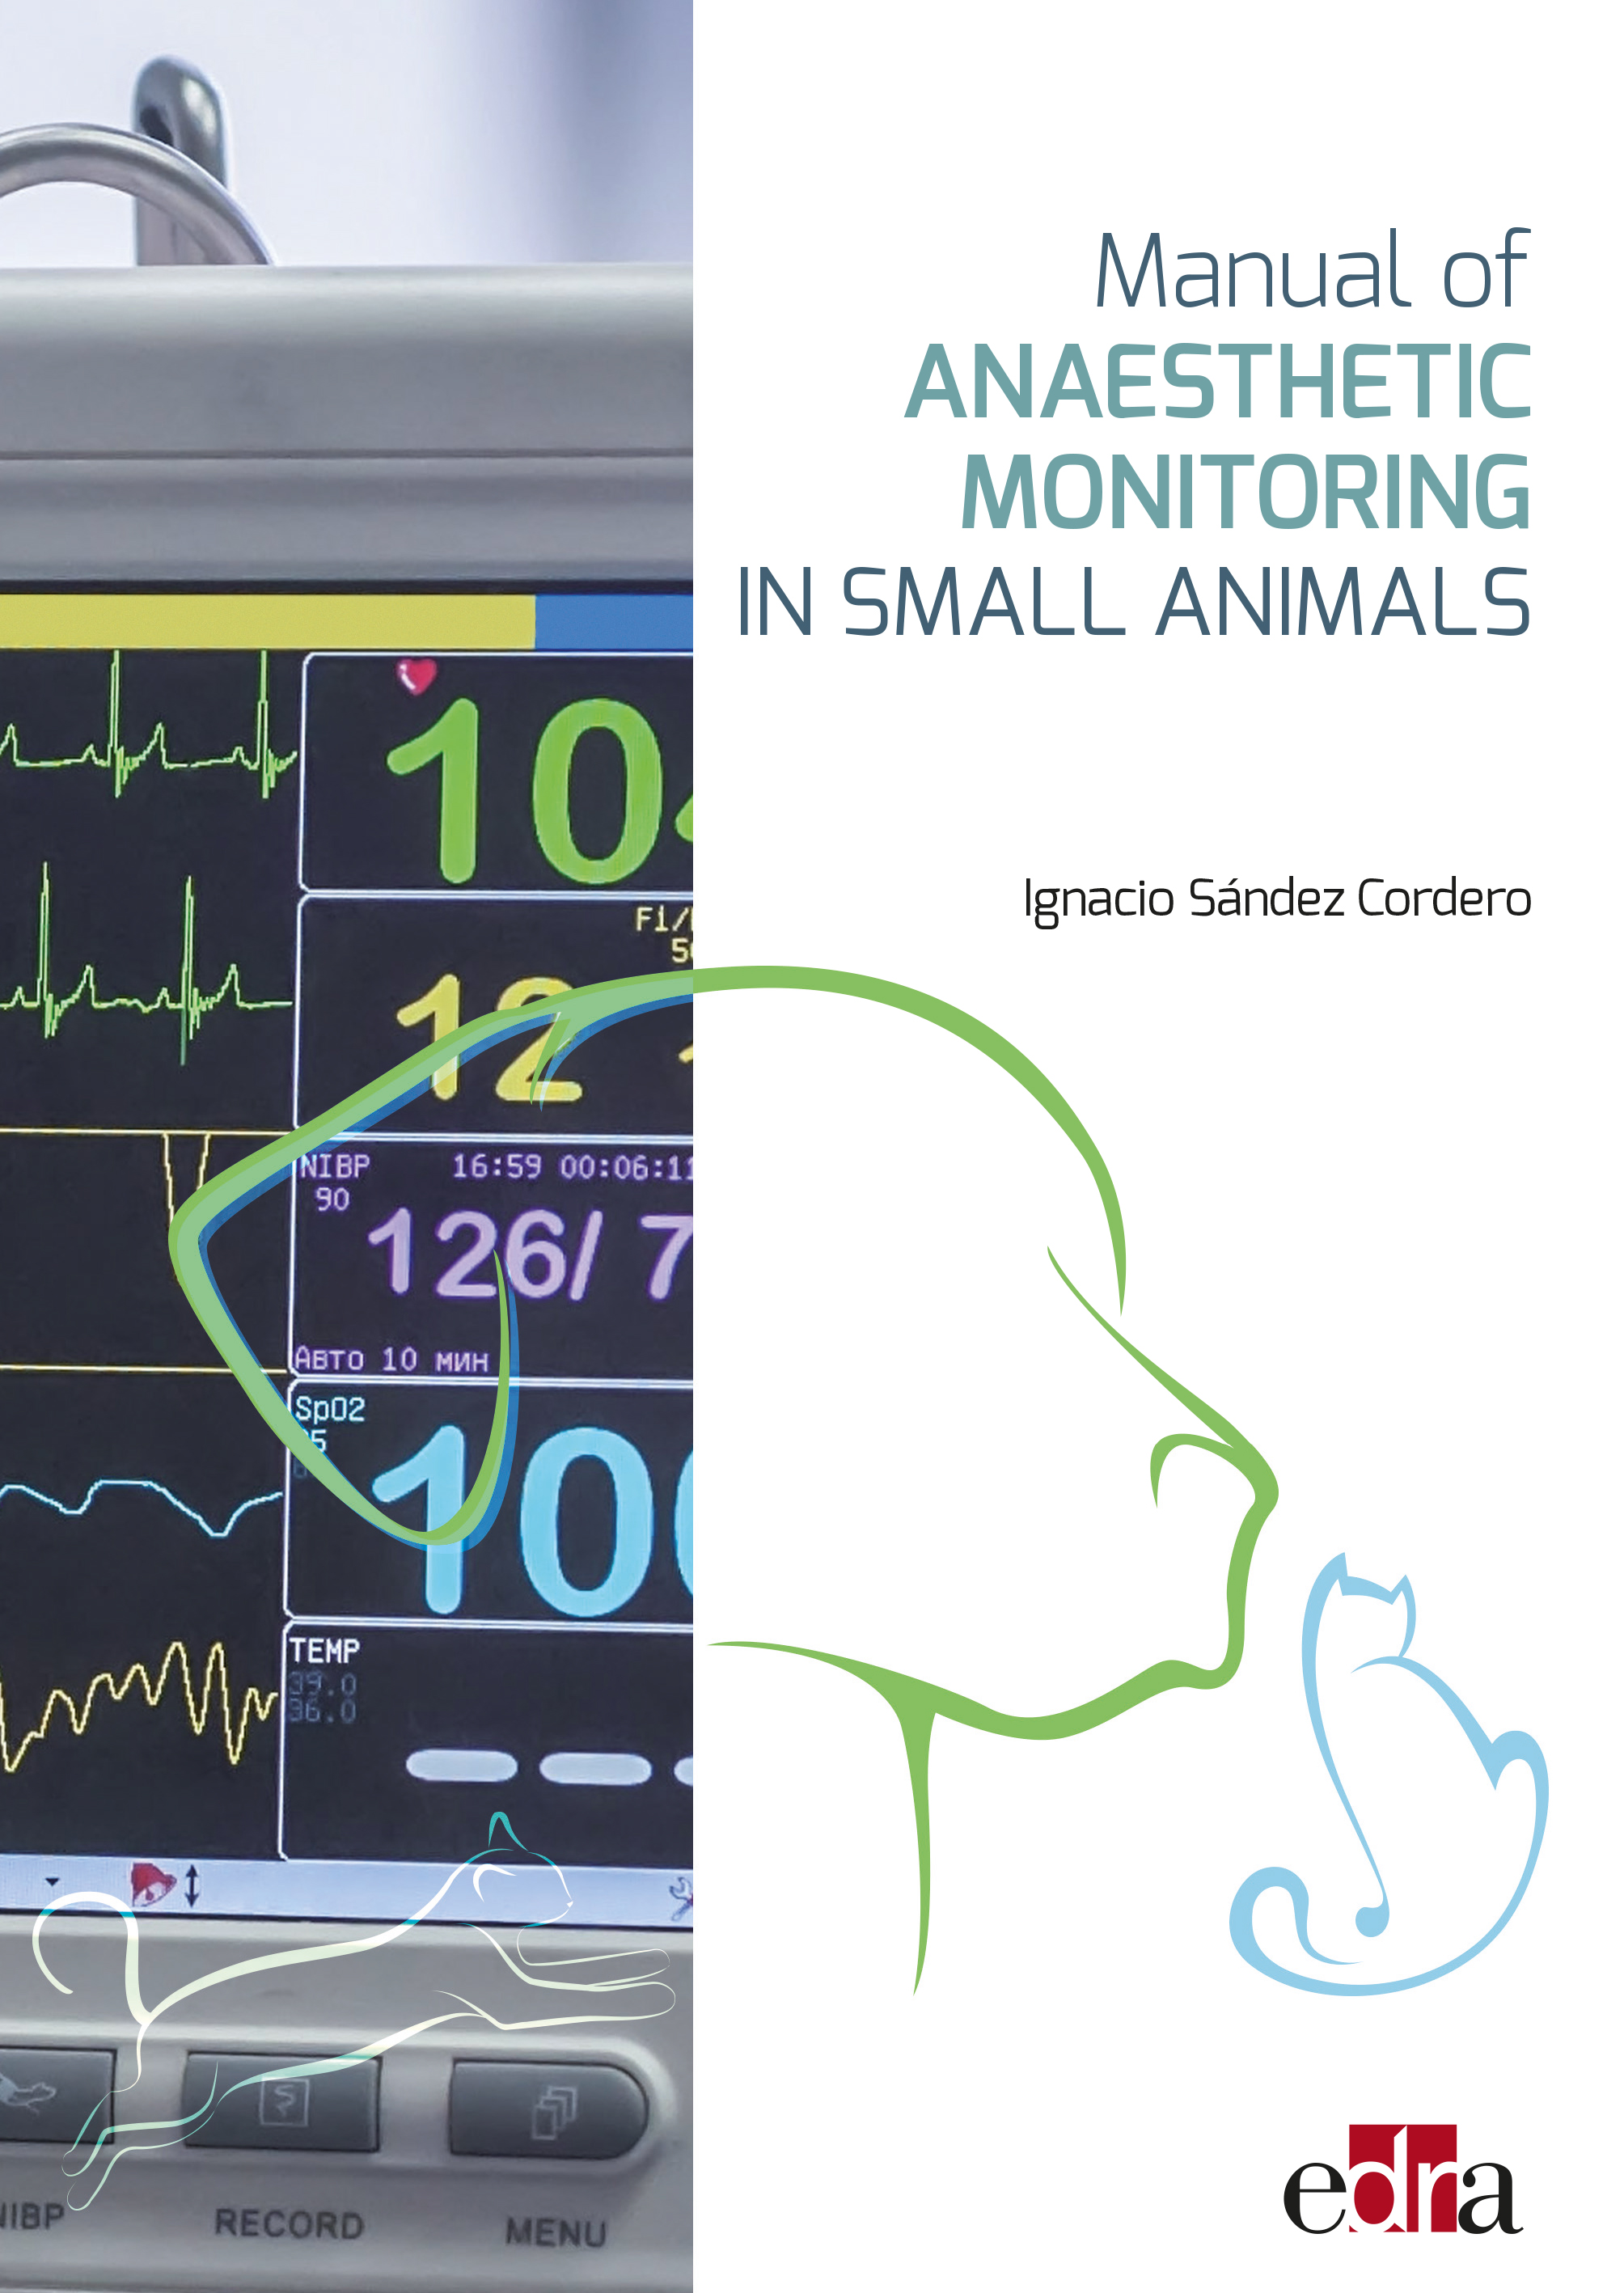 Manual of Anaesthetic Monitoring in Small Animals (9788418339585)